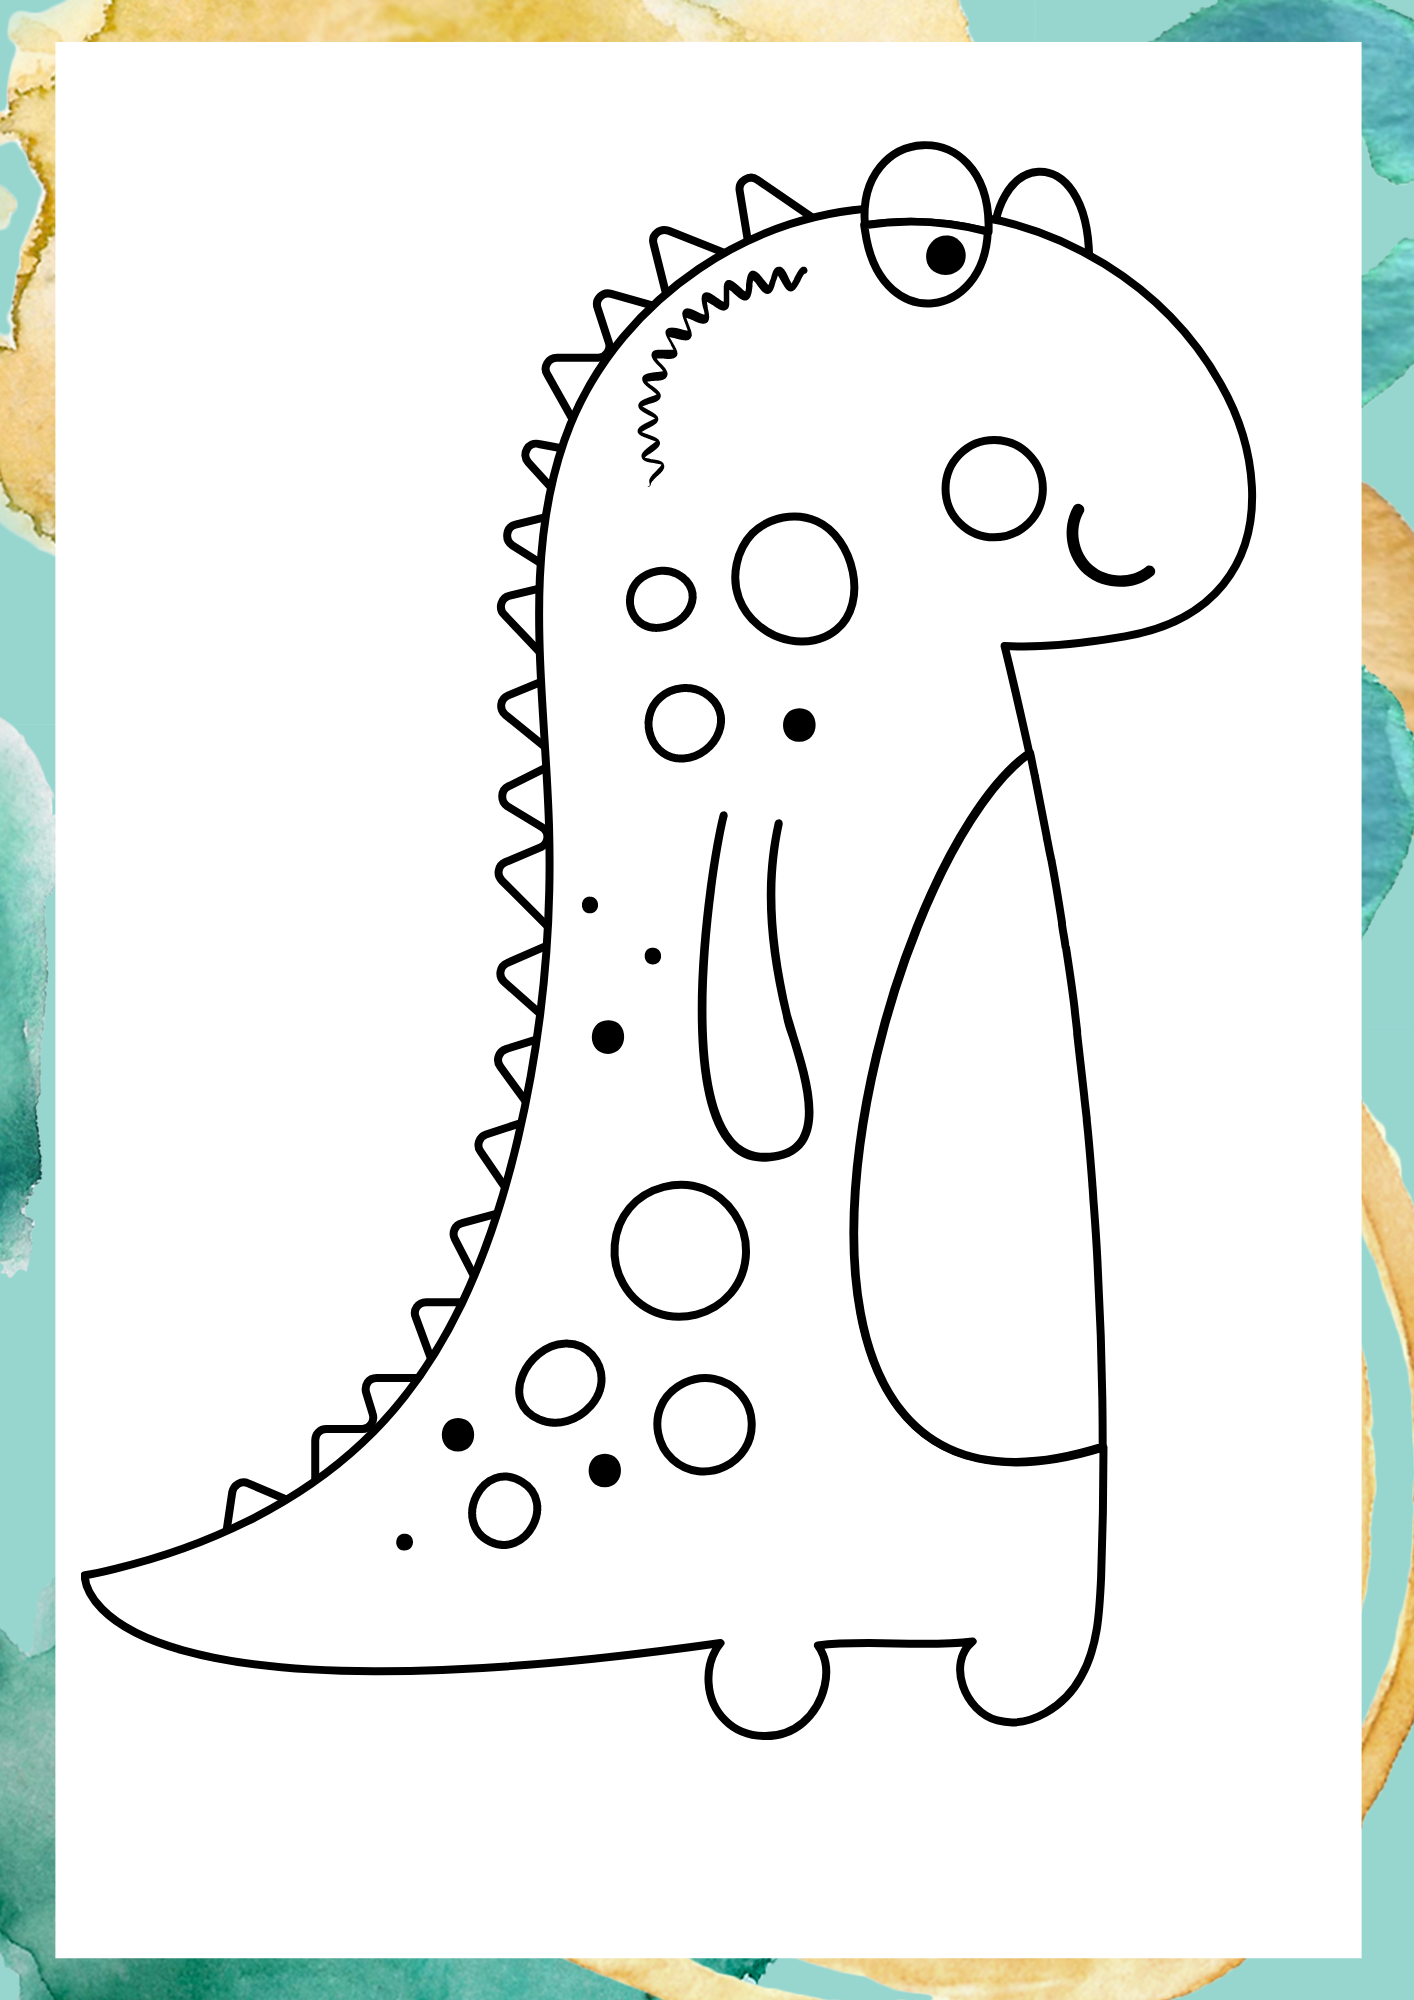 Dinasaur coloring pages, coloring page, coloring page for toddlers, Coloring Page, coloring sheet, happy color, colouring, free coloring pages, coloring pages for kids, printable coloring pages, cute coloring pages, colouring pages, colouring to print, free printable coloring pages, free coloring pages for kids, easy coloring pages, coloring sheets